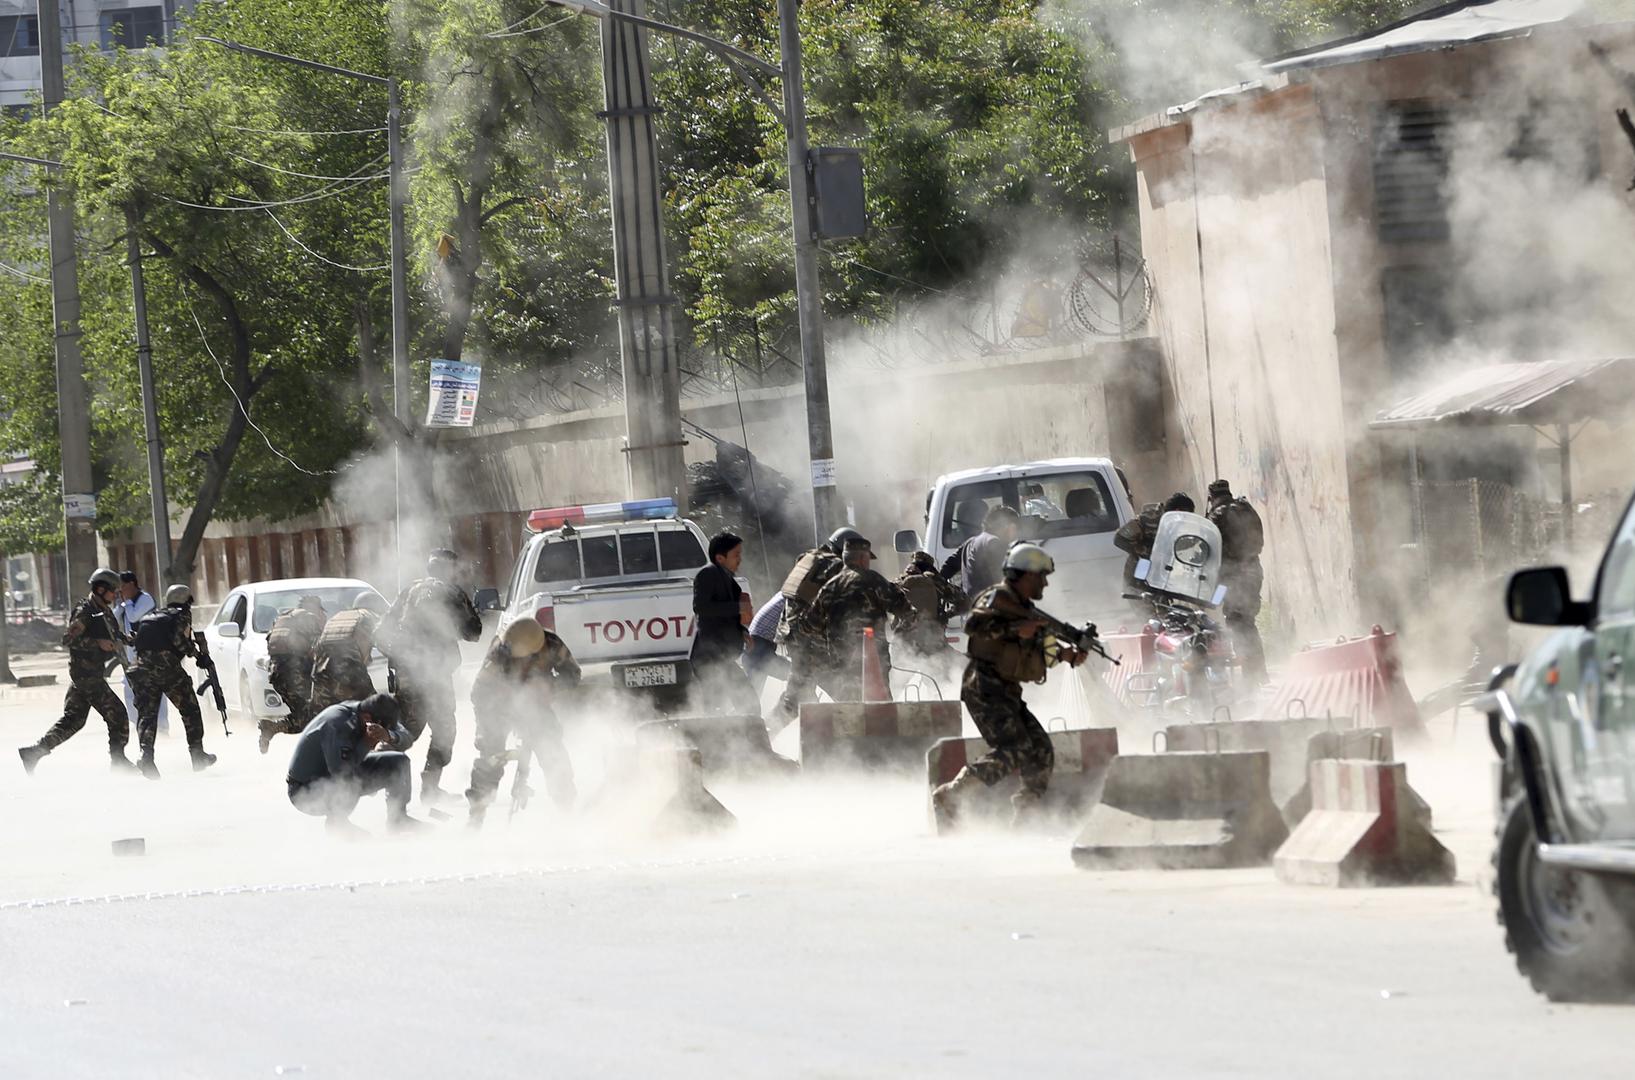 Security forces run from the site of a suicide attack after the second bombing in Kabul, Afghanistan, April 30, 2018. The coordinated double suicide bombing in central Kabul killed at least 25 civilians, including nine journalists. © 2018 AP Photo/Massoud